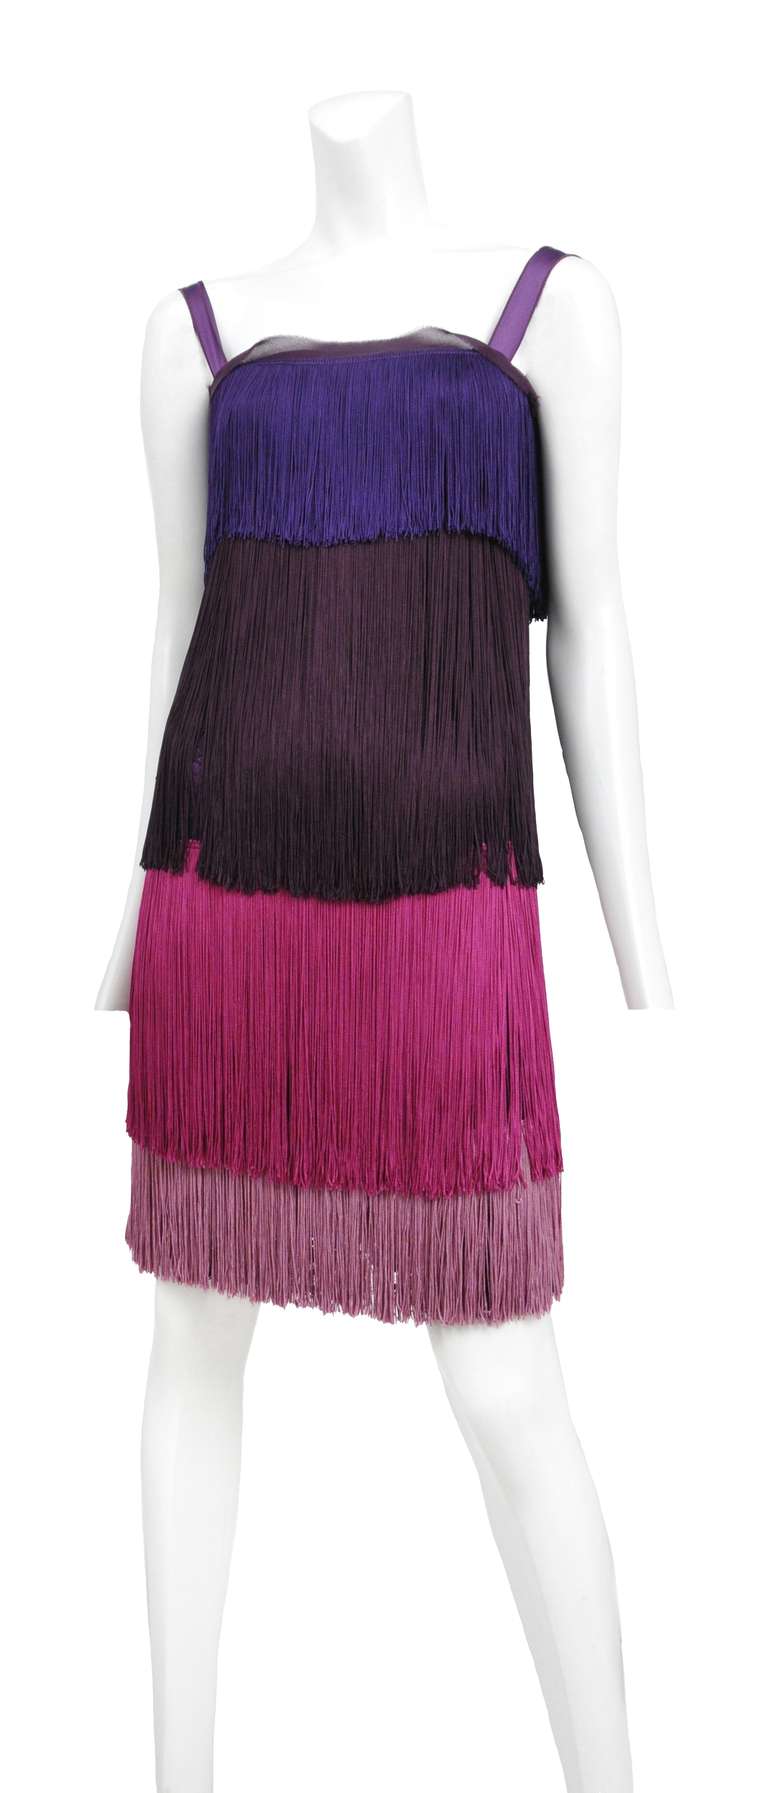 Dolce and Gabbana multi colored tiered fringe dress with lace panels.